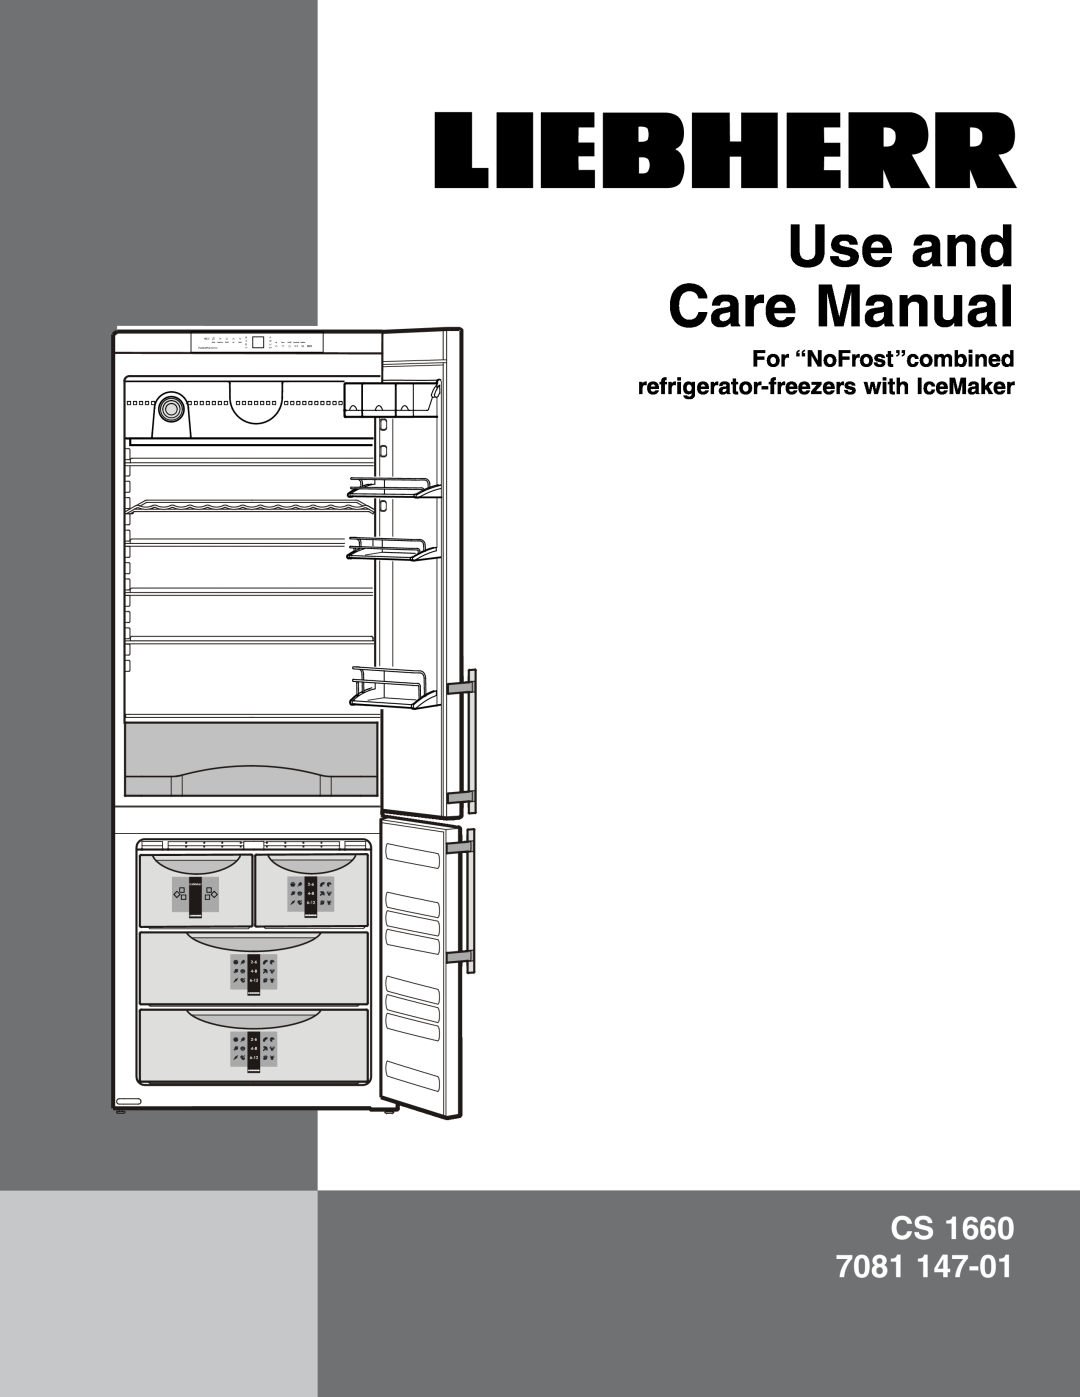 Liebherr manual Use and Care Manual, CS 1660 7081, For “NoFrost”combined refrigerator-freezers with IceMaker 